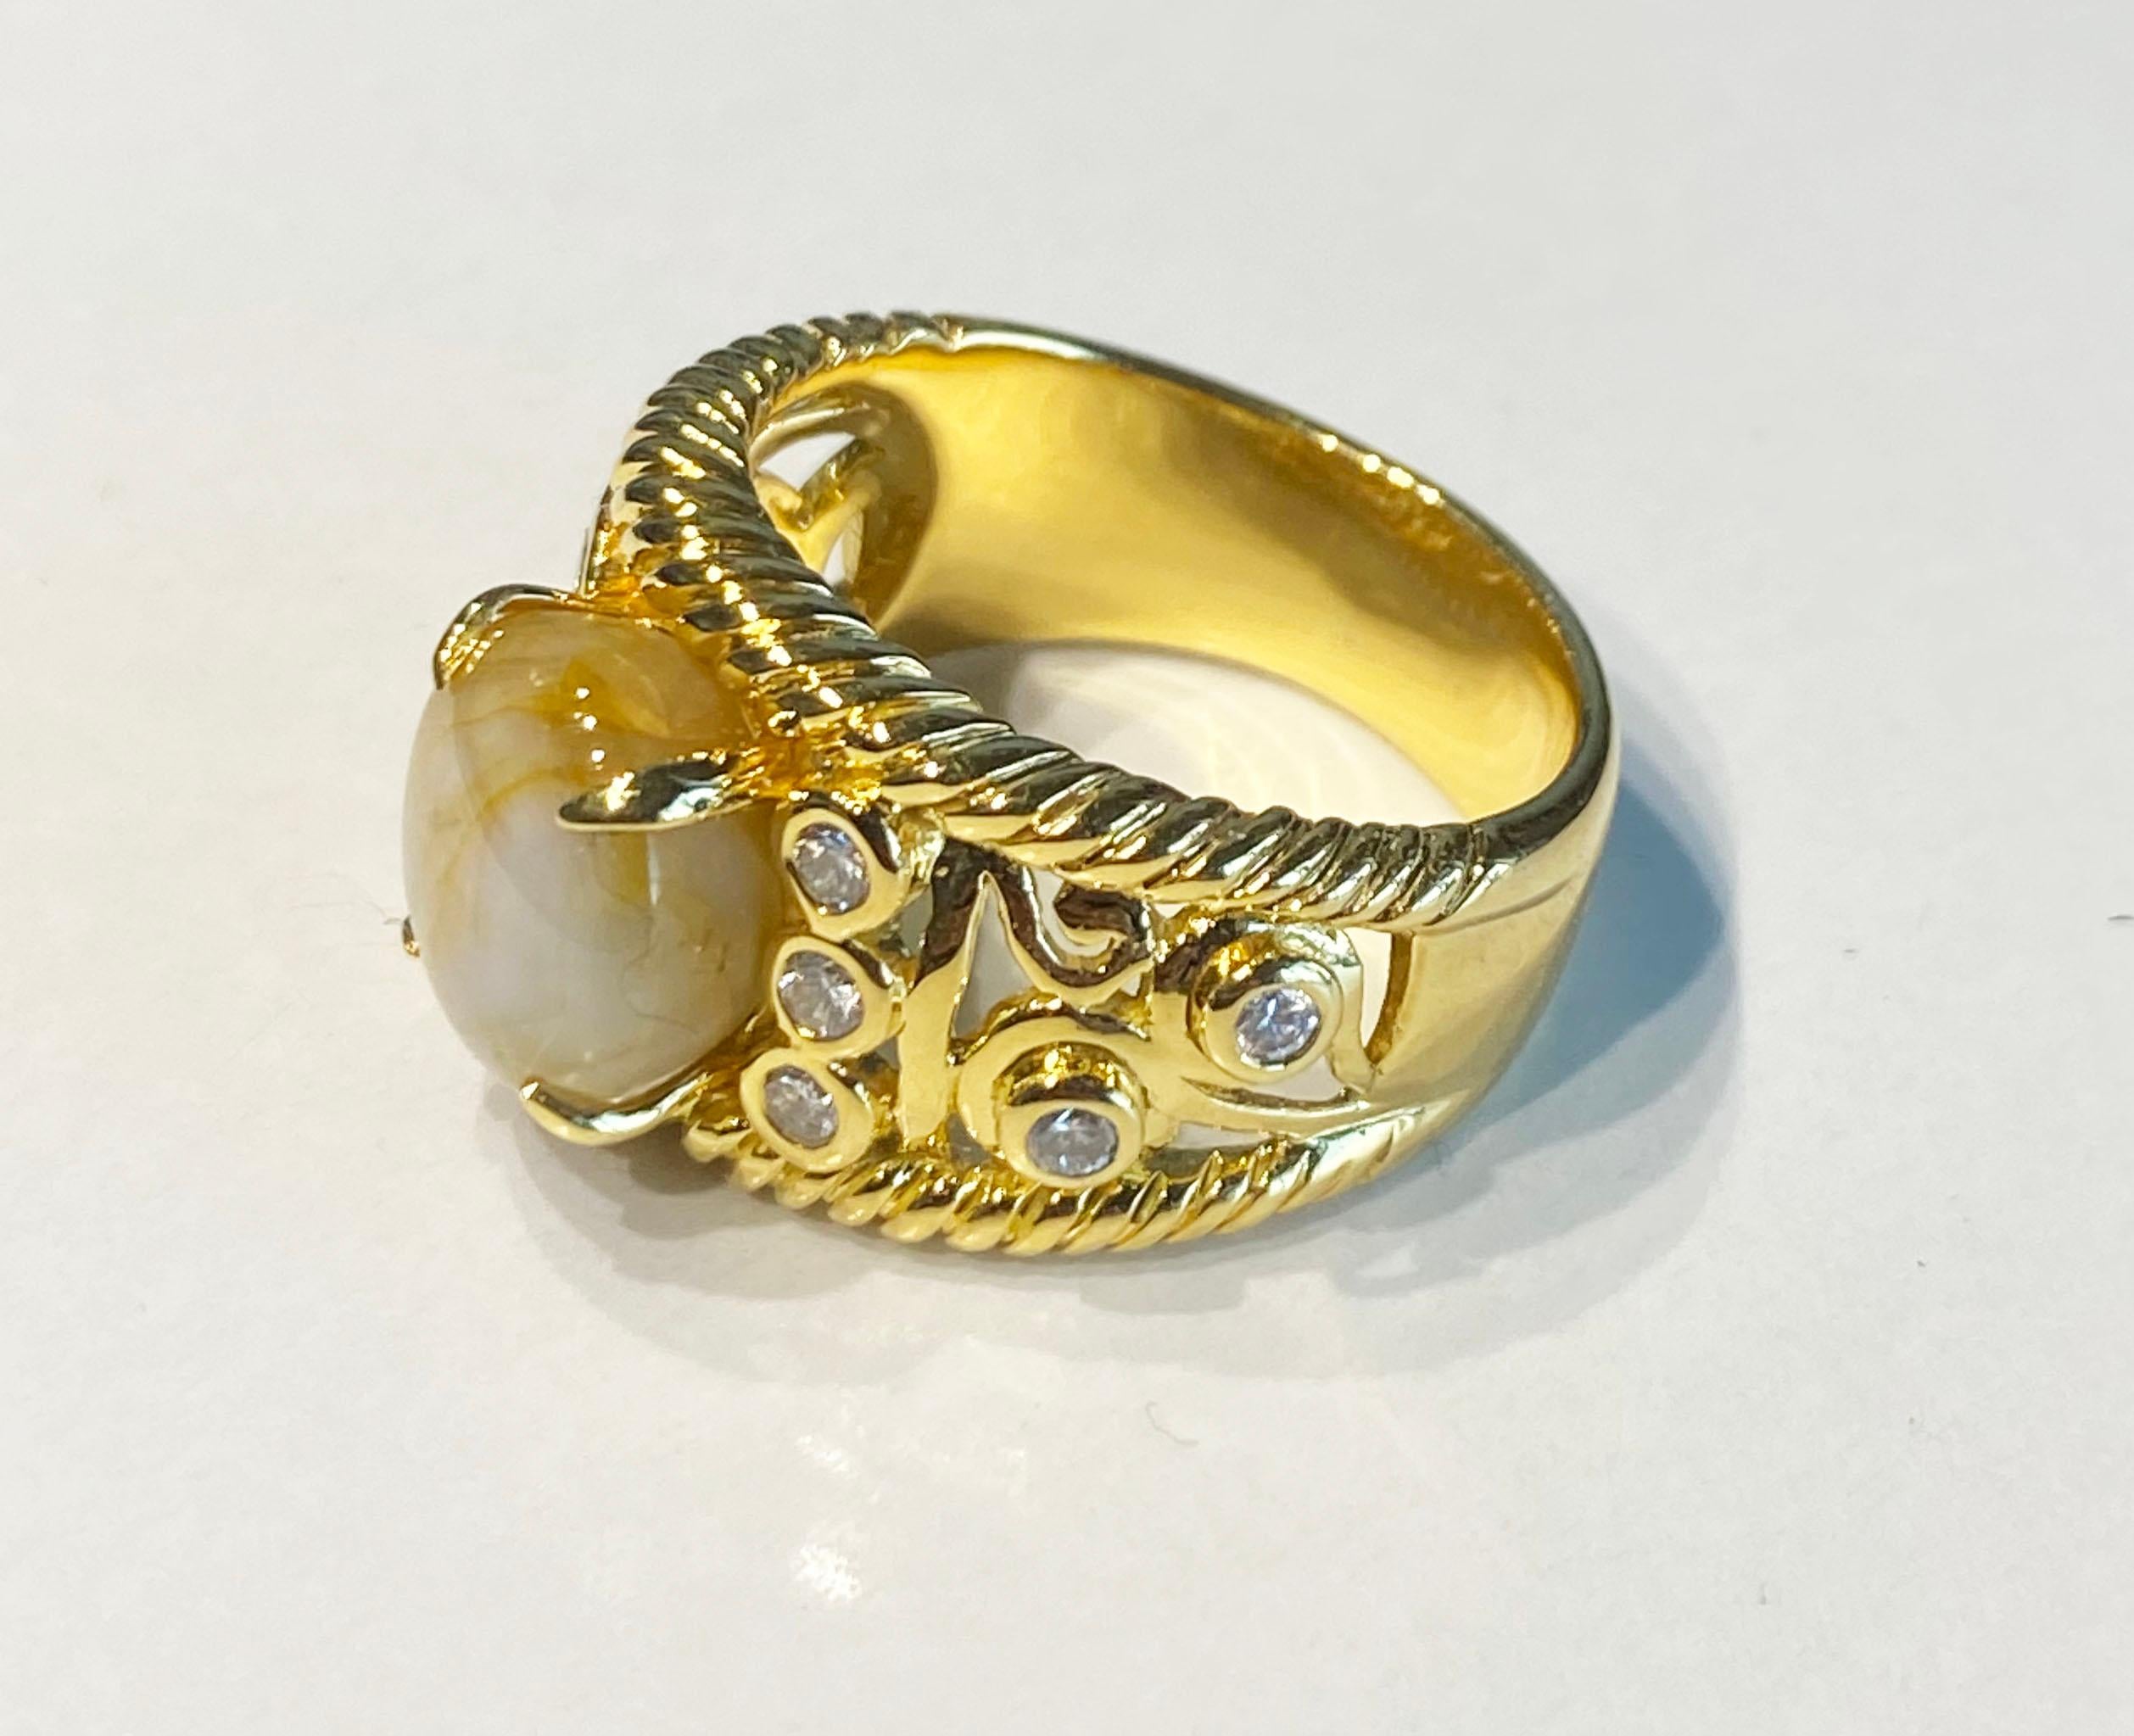 A Star Sapphire & Diamond Ring set in 18kt Yellow Gold  For Sale 2